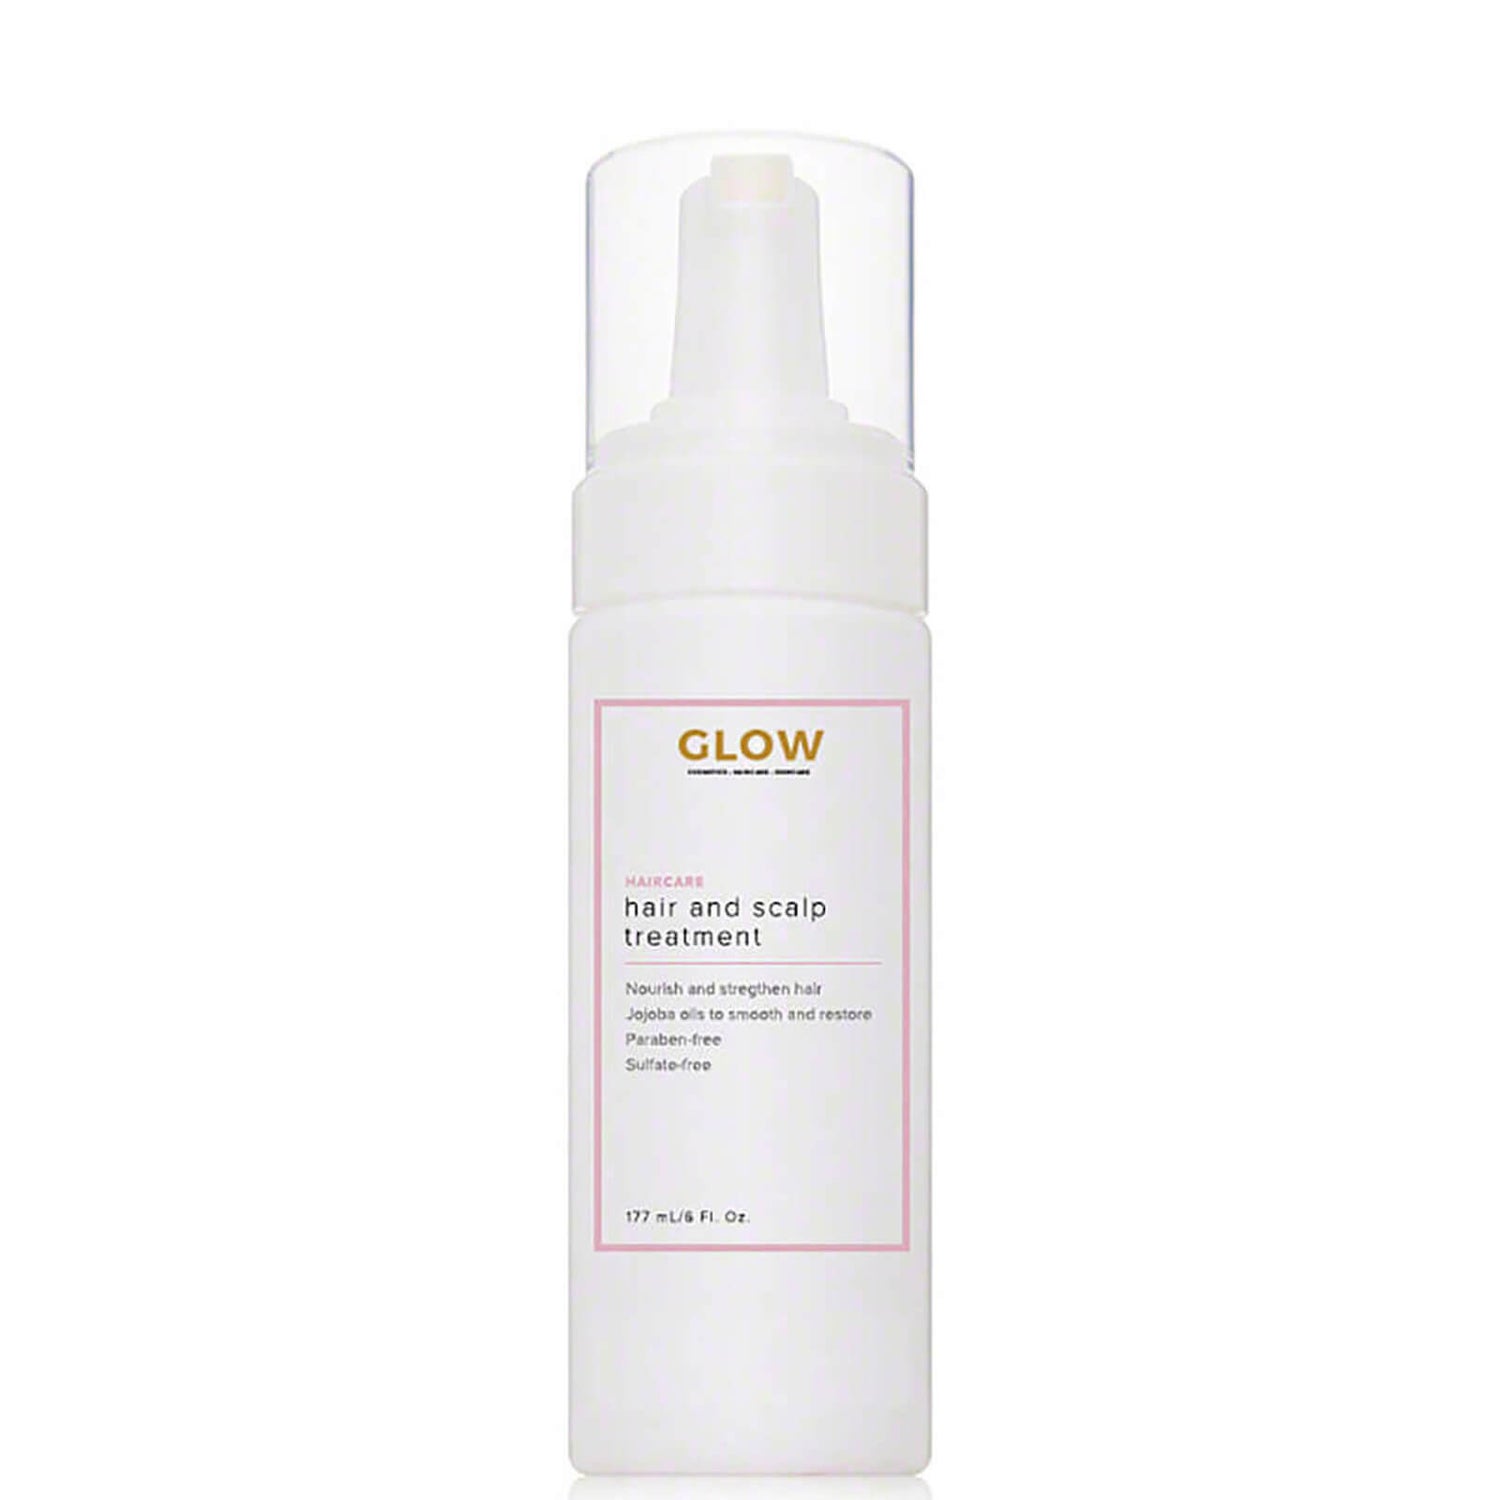 Glow Hair and Scalp Treatment